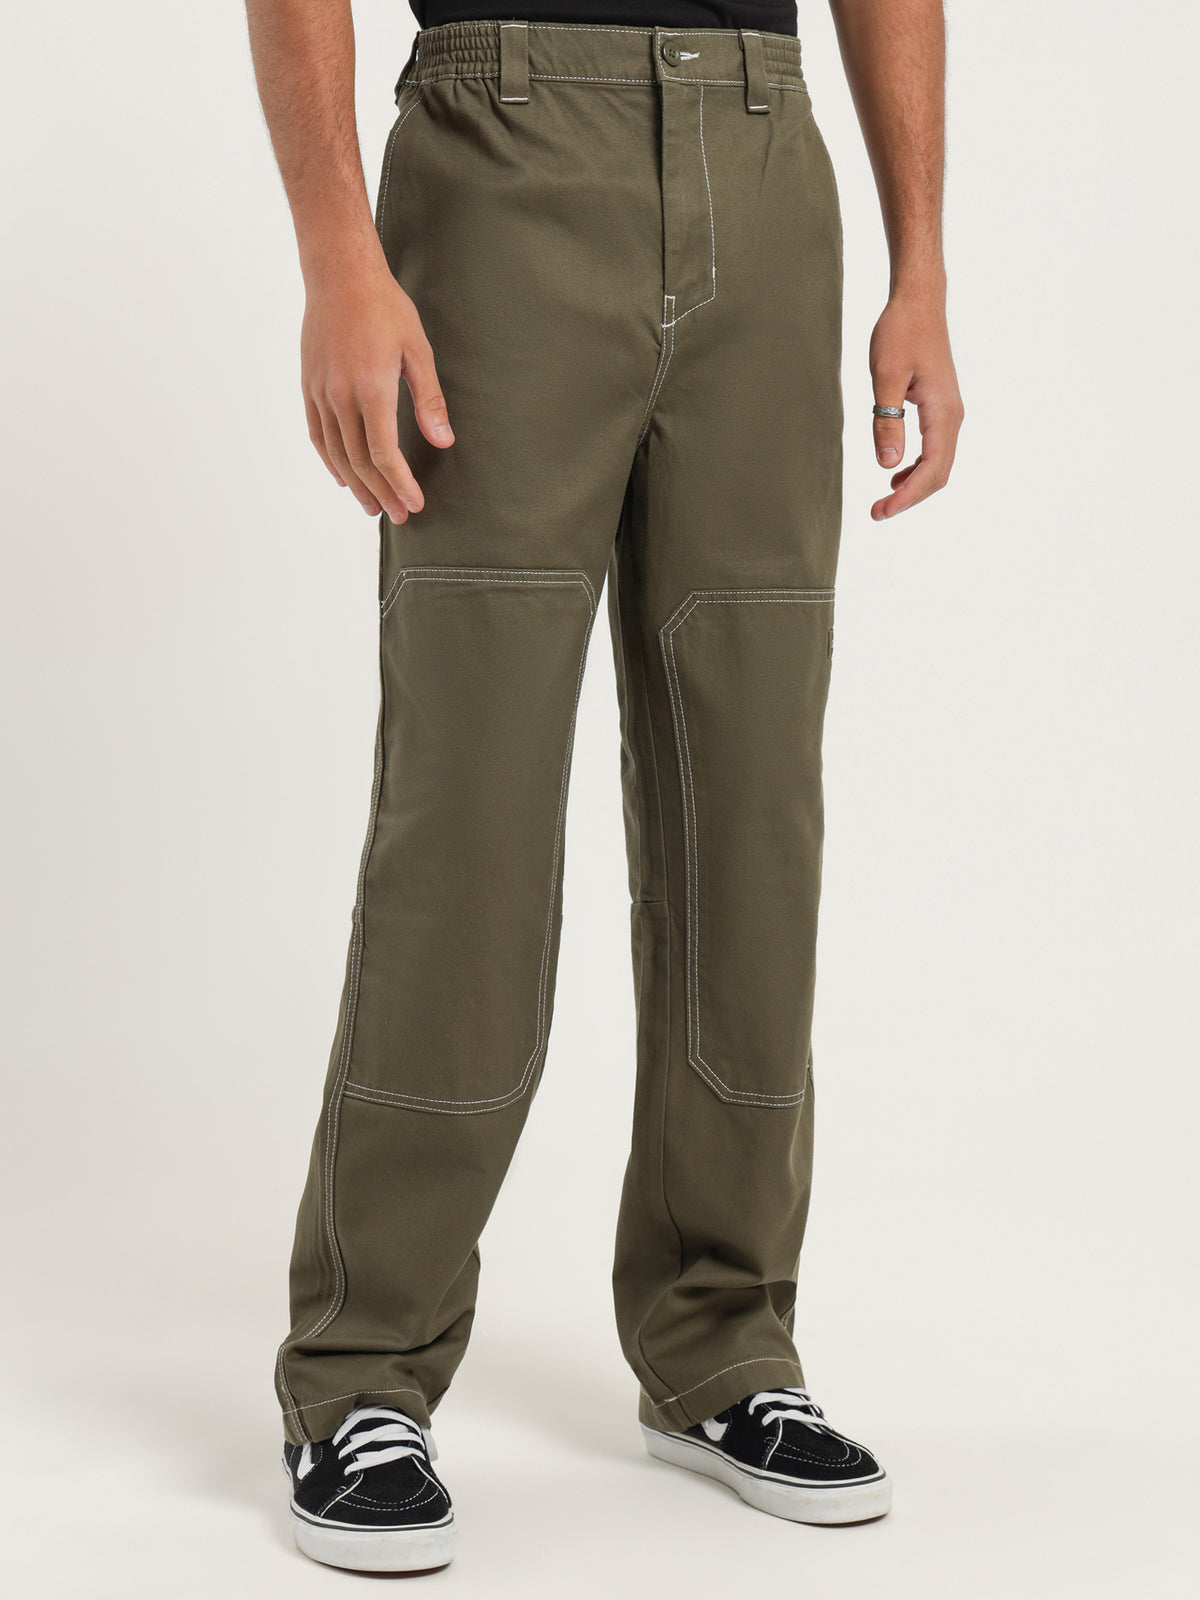 Florala Pants in Military